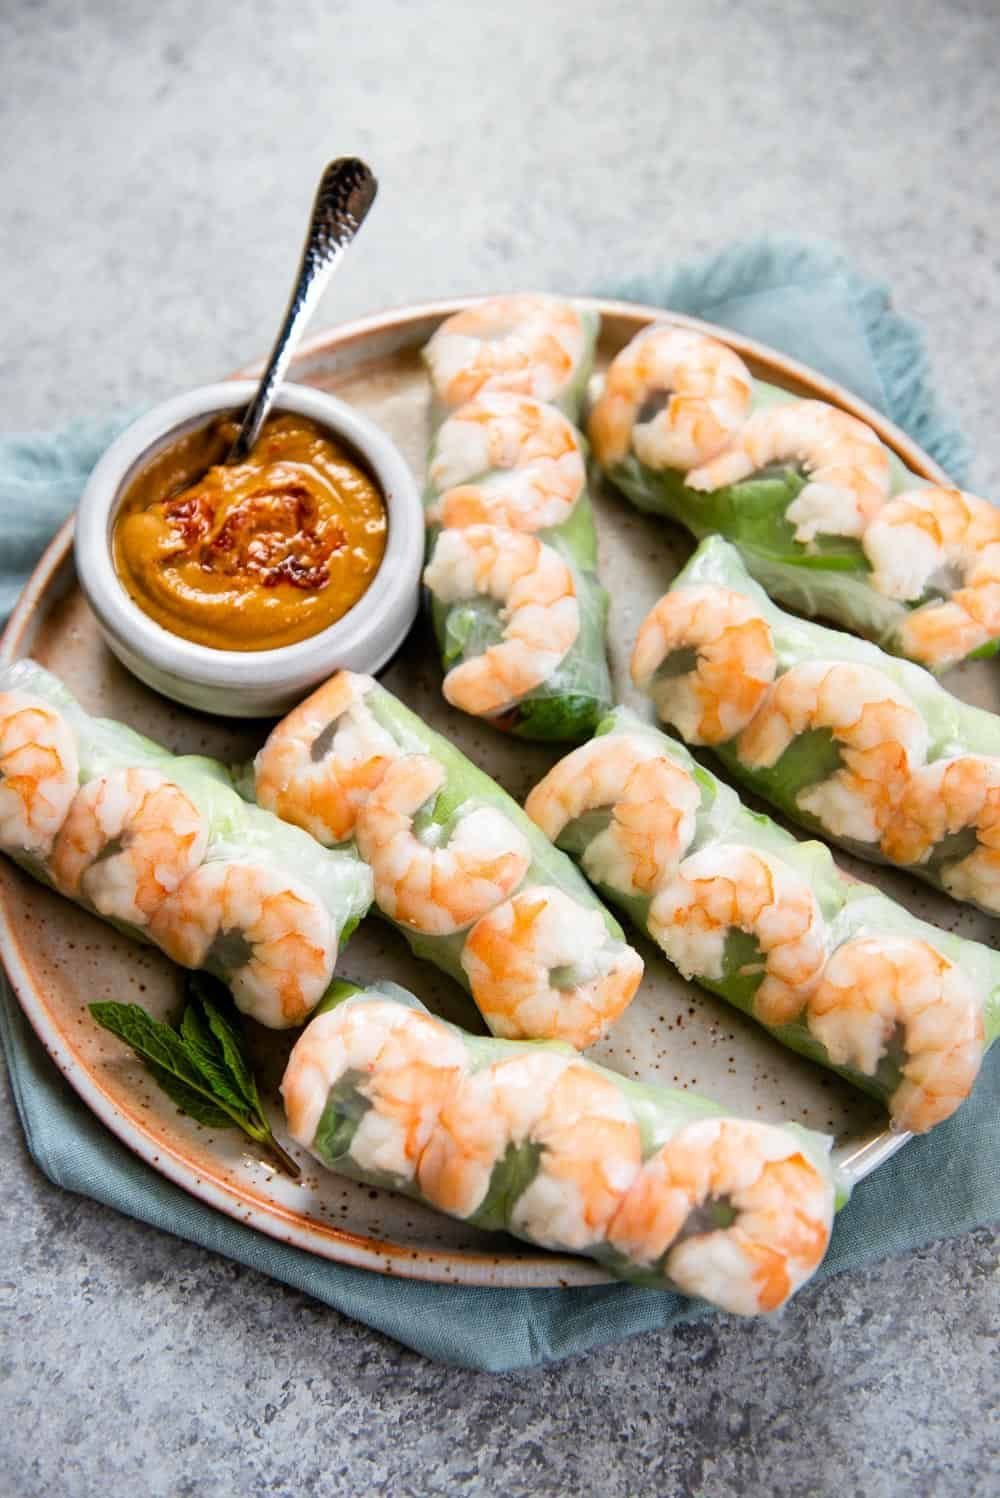 Previous Happening: Cucumber Craze: From Cocktails to Pickles + A Vietnamese Summer Roll Recipe!